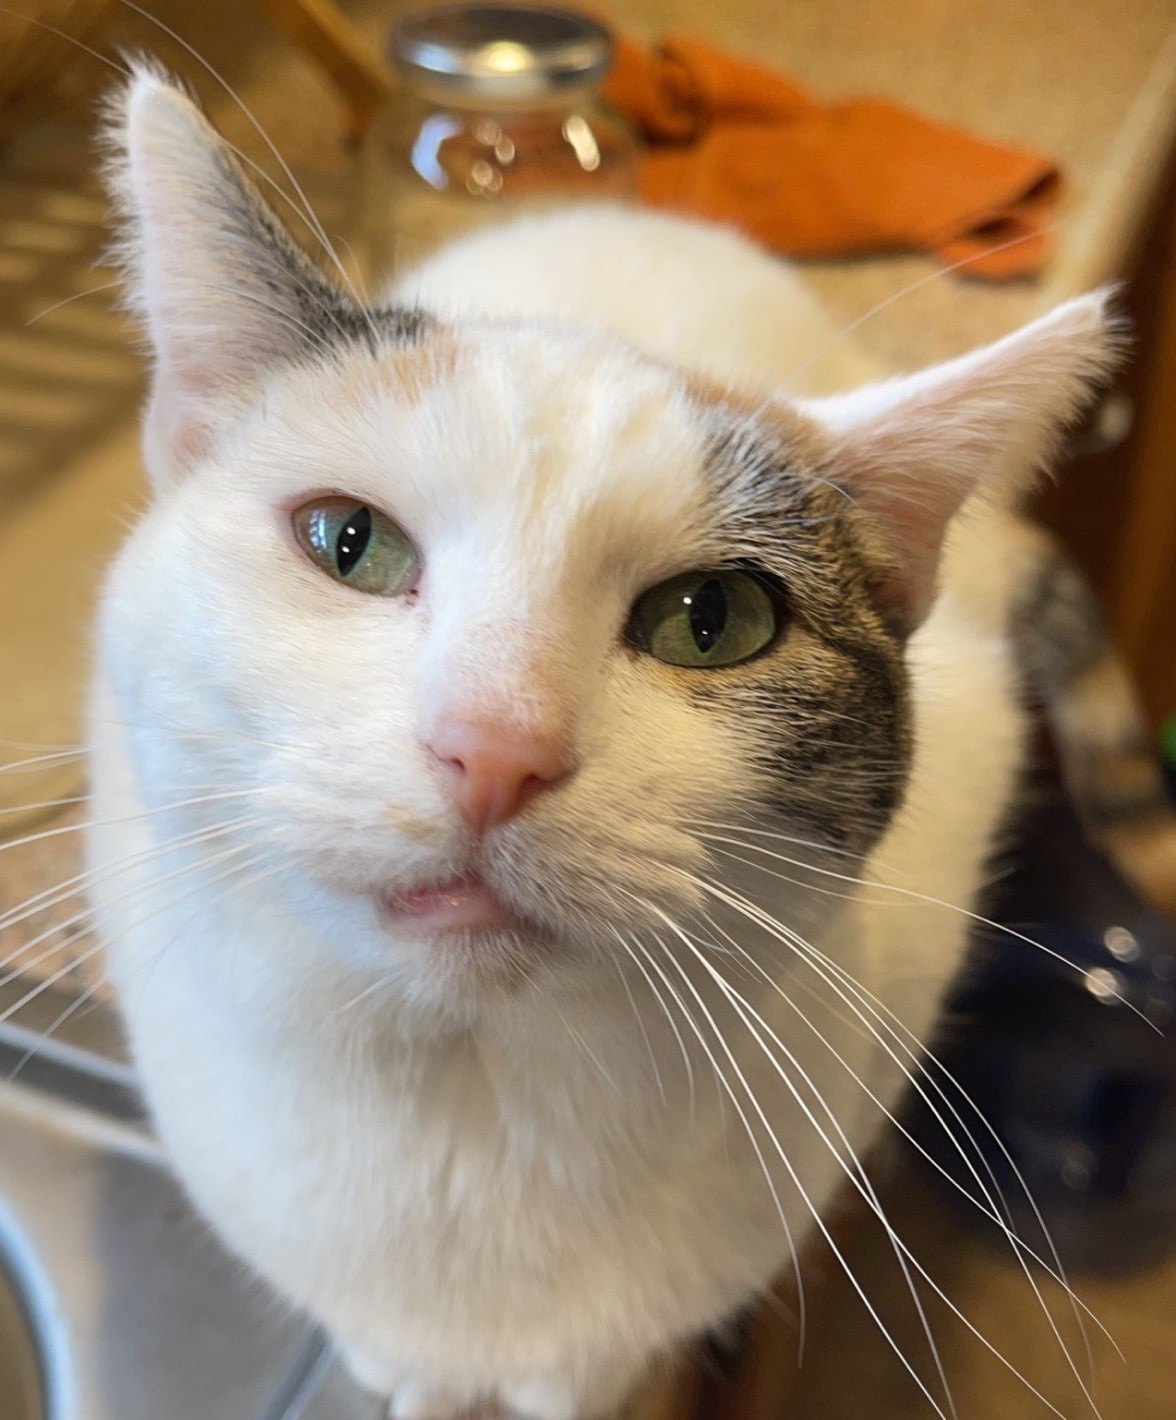 Violet, a piebald cat with green eyes looks up at the camera from the kitchen counter